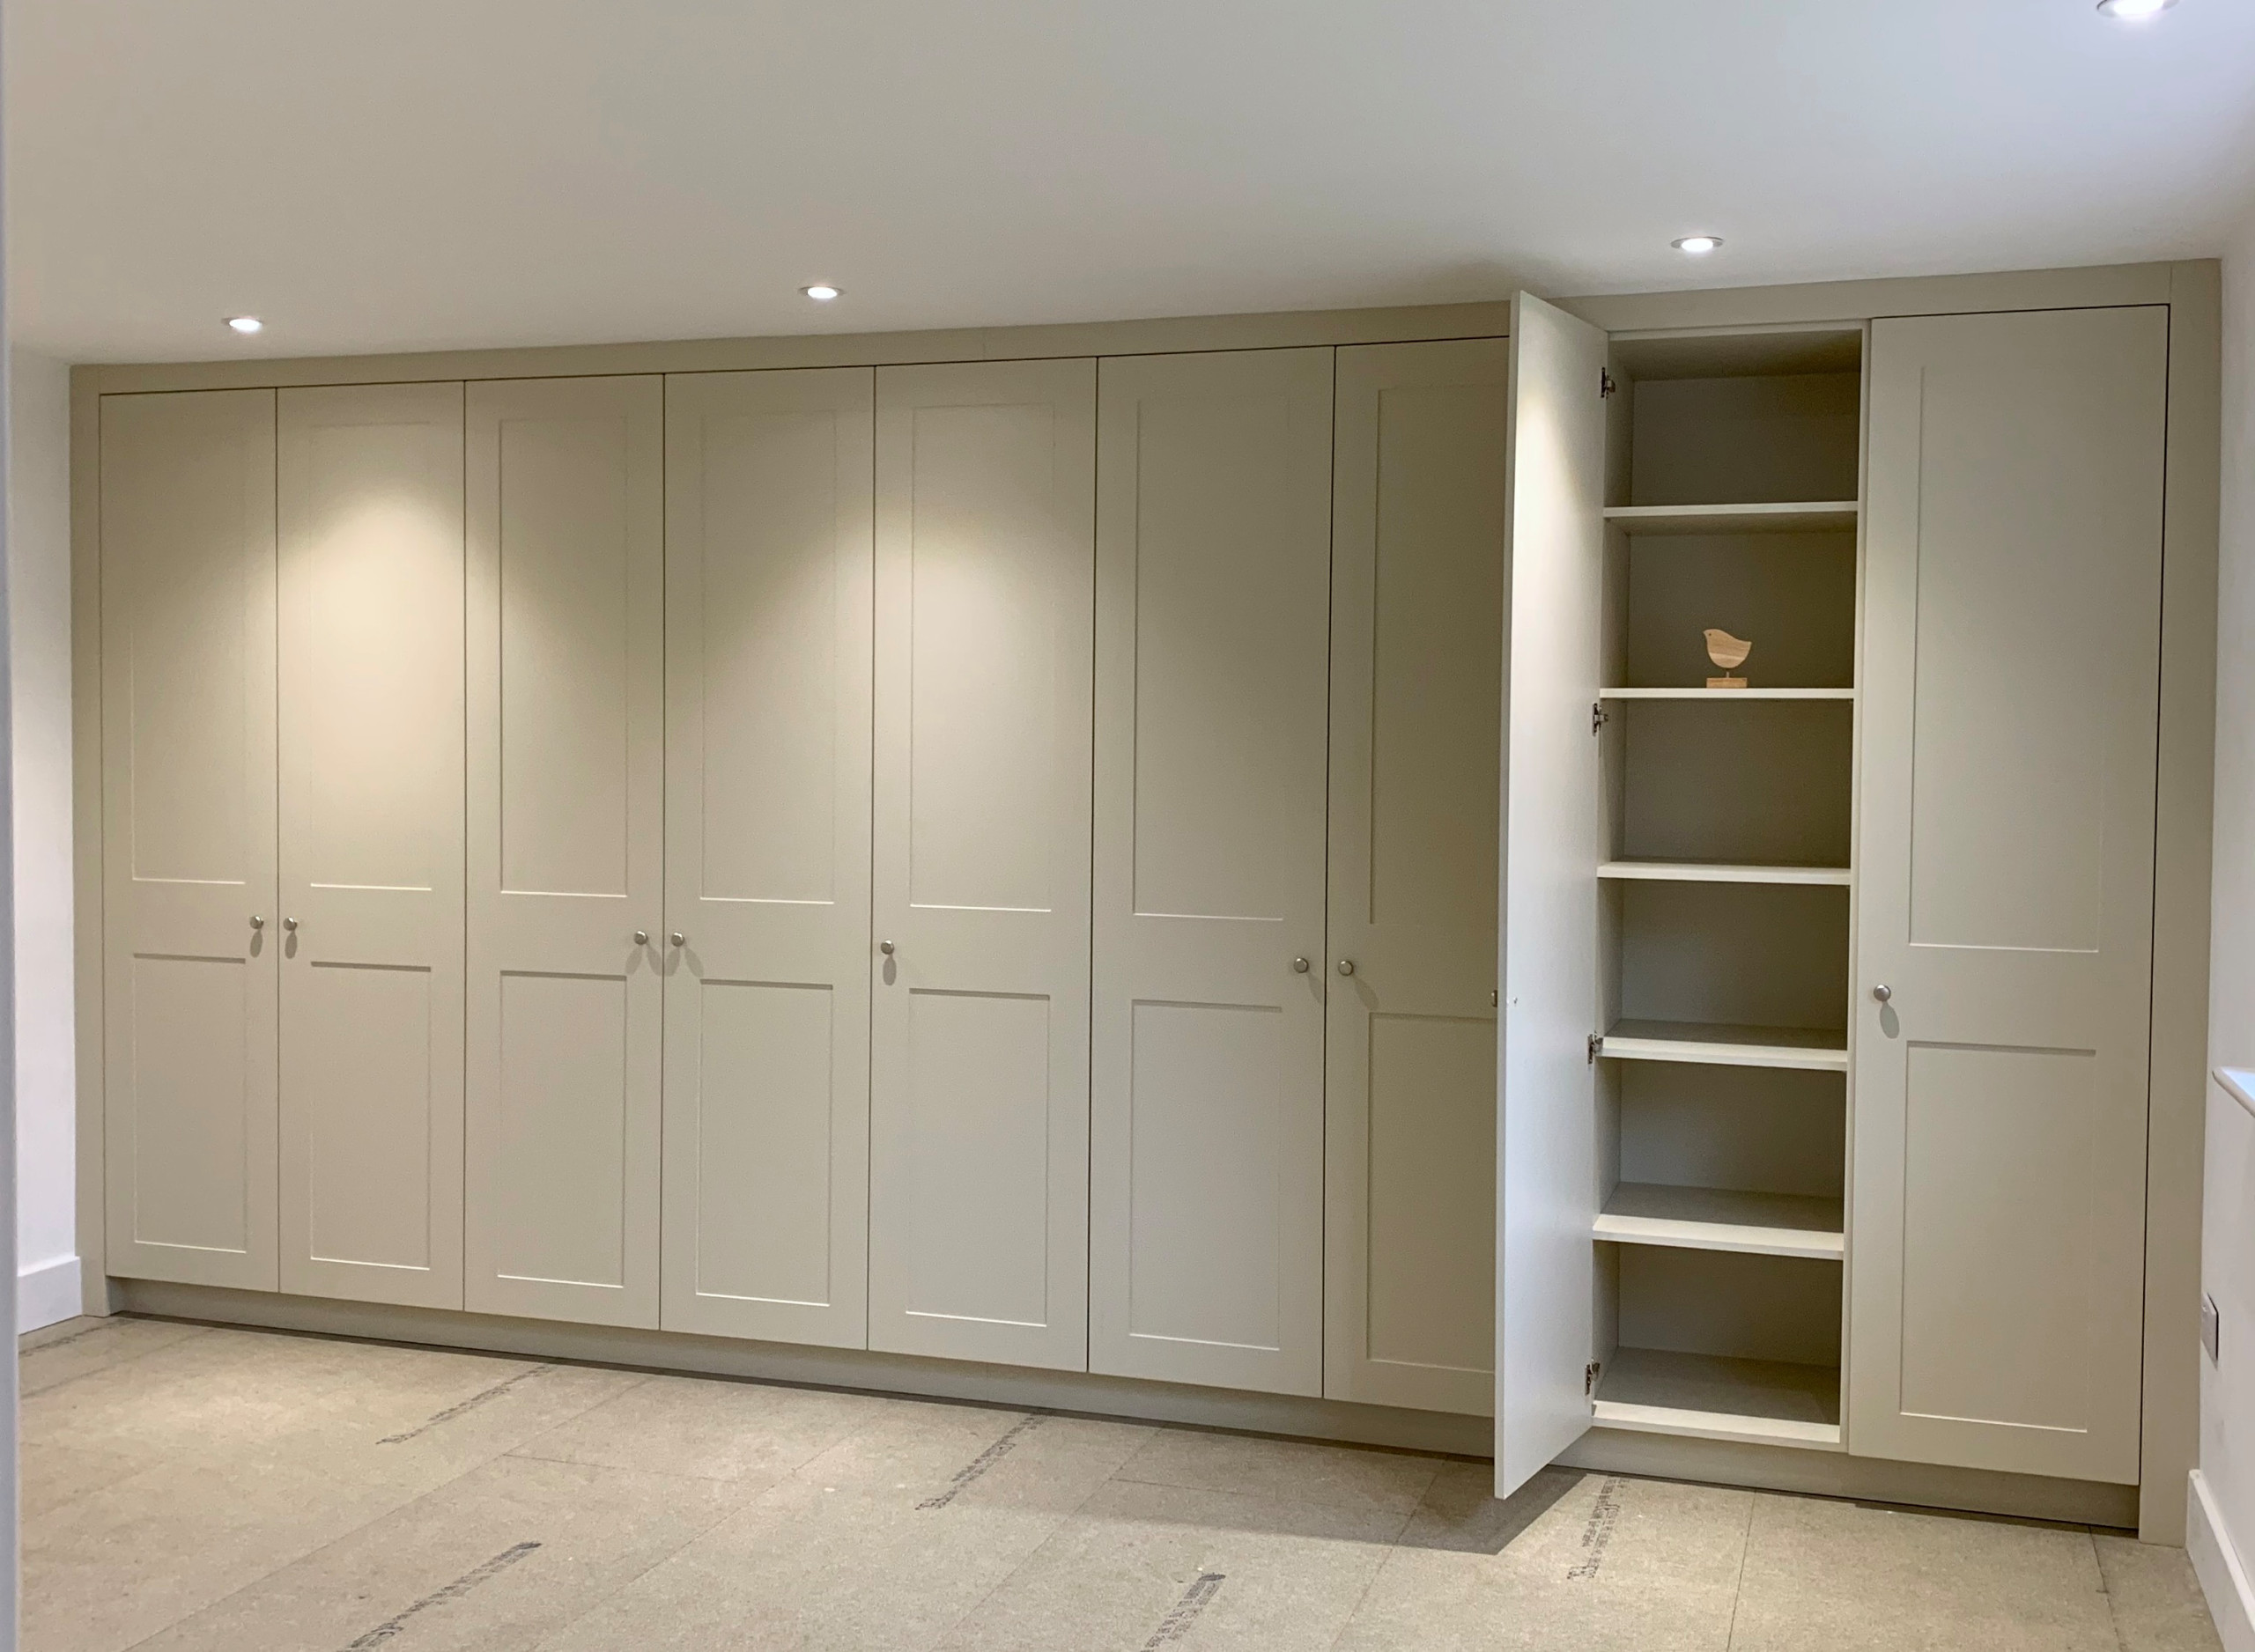 Bespoke Fitted Wardrobes in 'Mussell' Colour